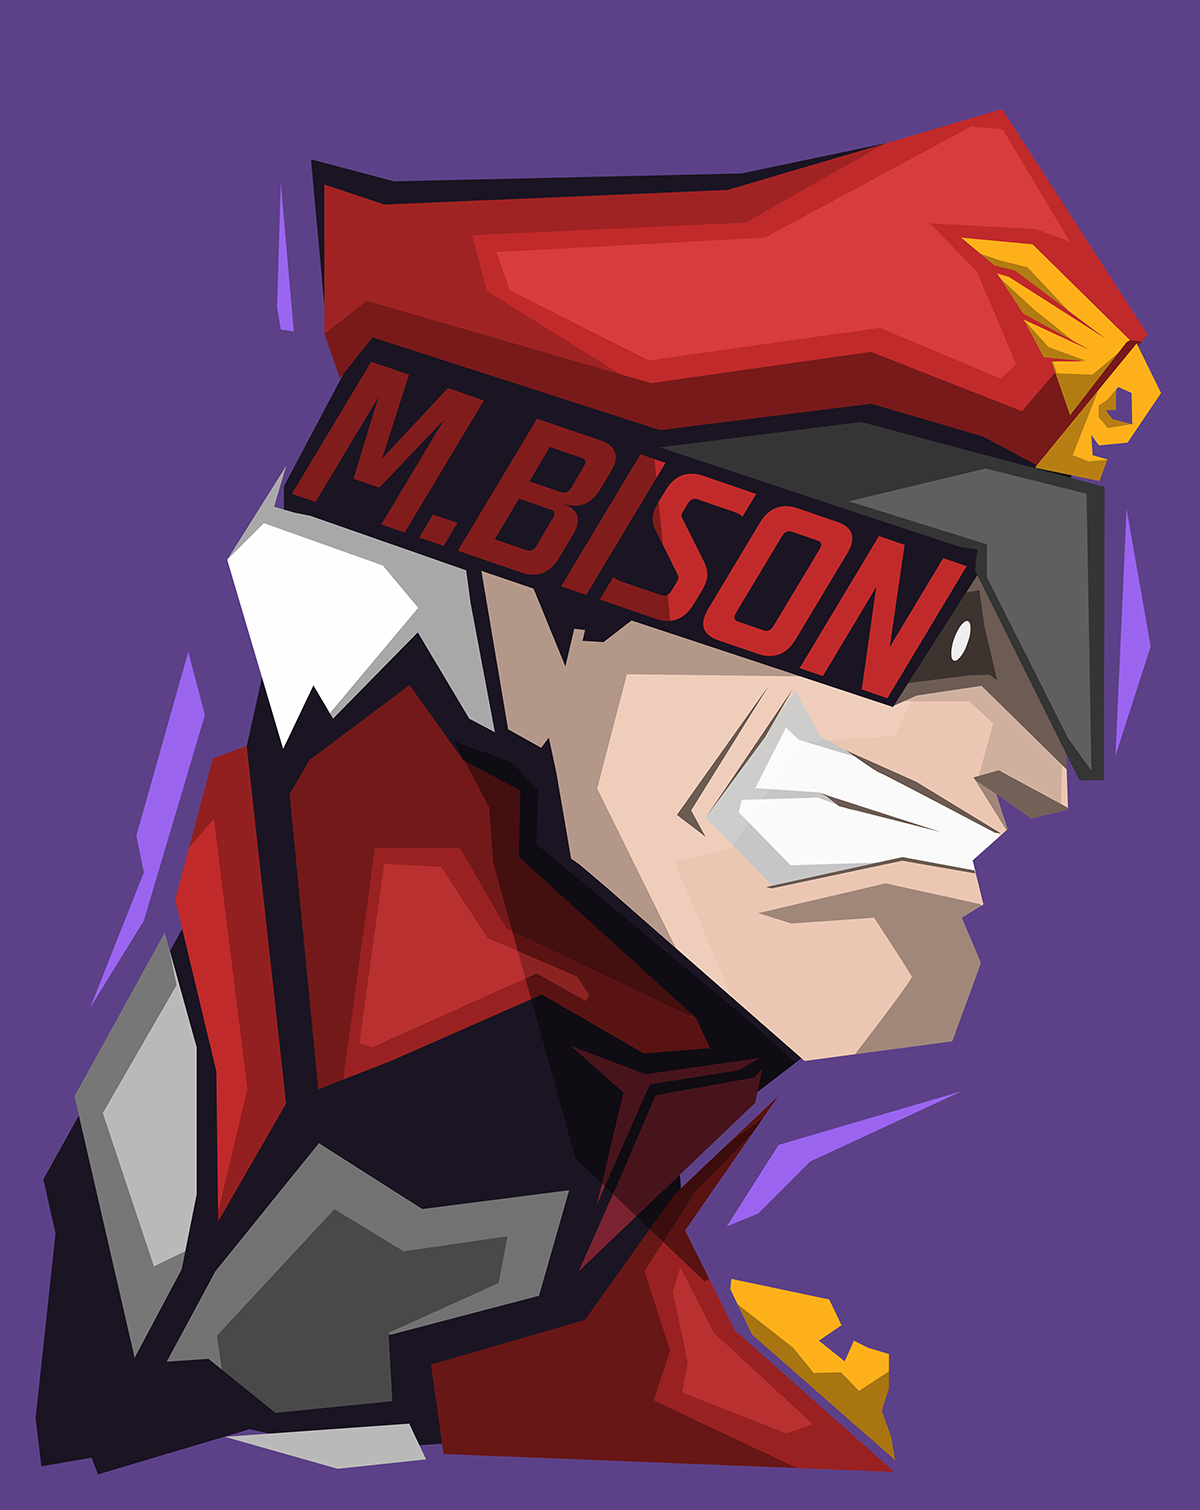 General 1200x1510 Street Fighter M. bison video game art purple background video games video game characters video game warriors profile